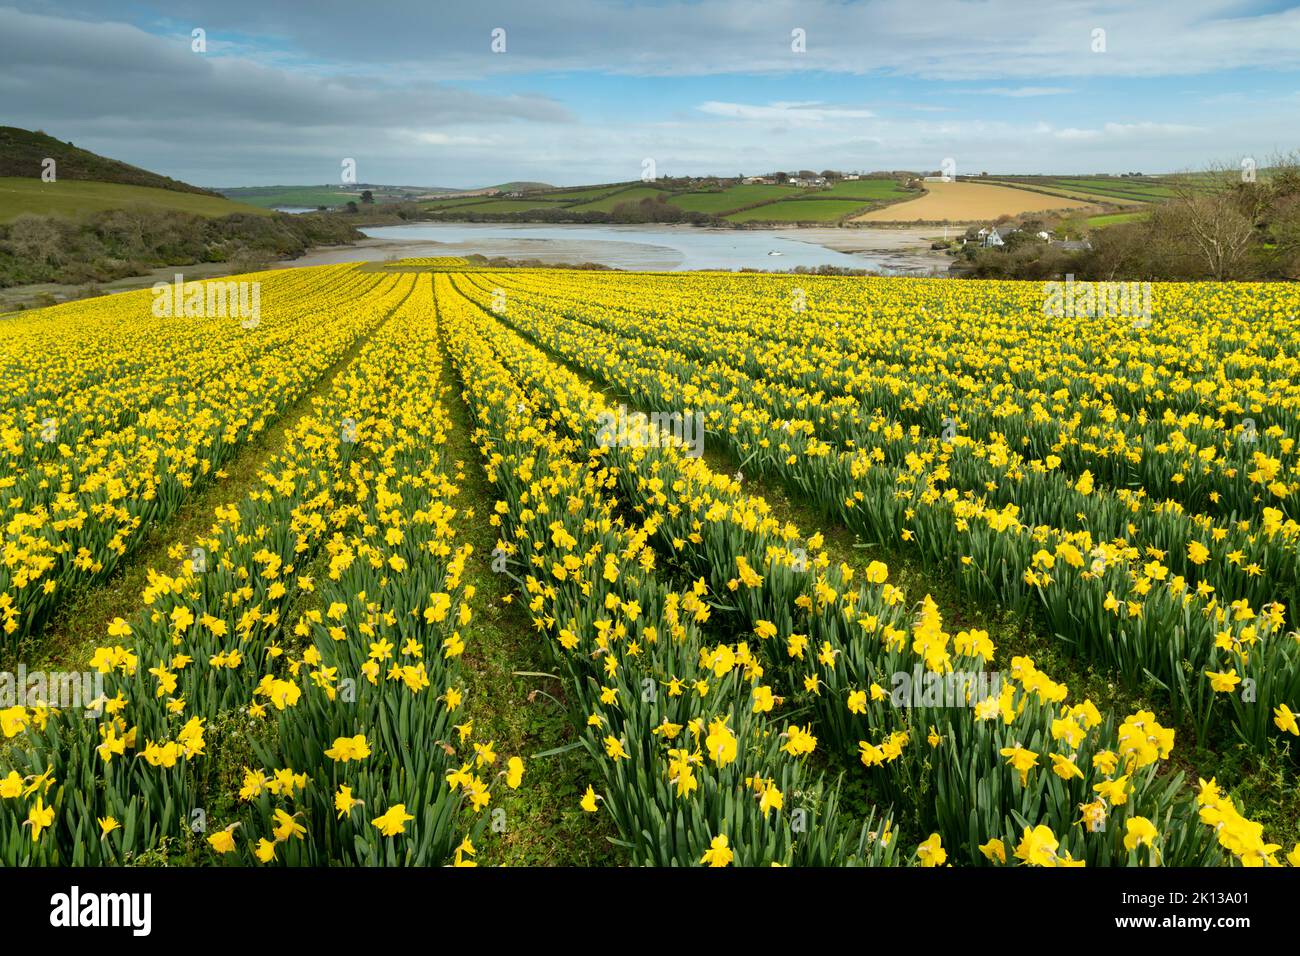 Field of flowering daffodils in spring near Padstow in Cornwall, England, United Kingdom, Europe Stock Photo